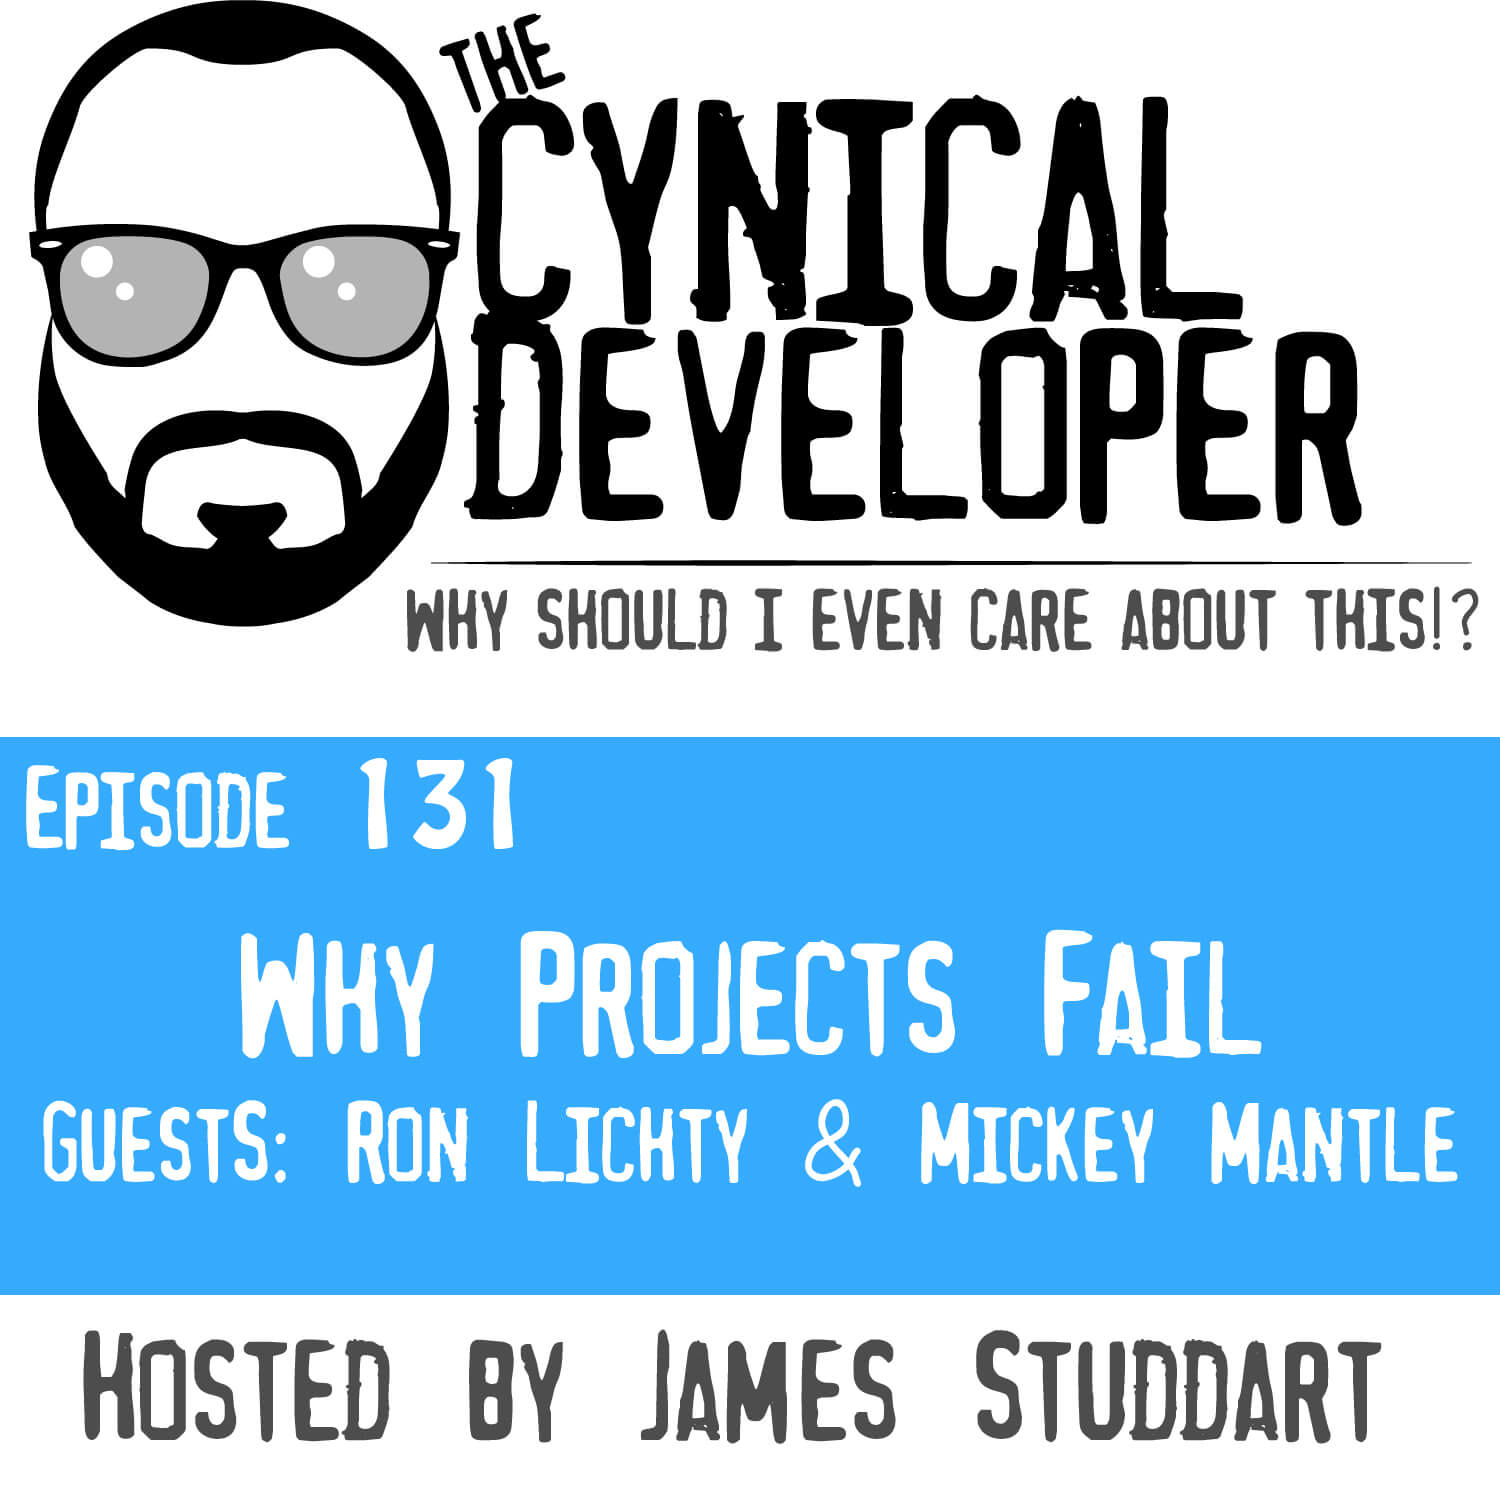 Episode 131 - Why Projects Fail